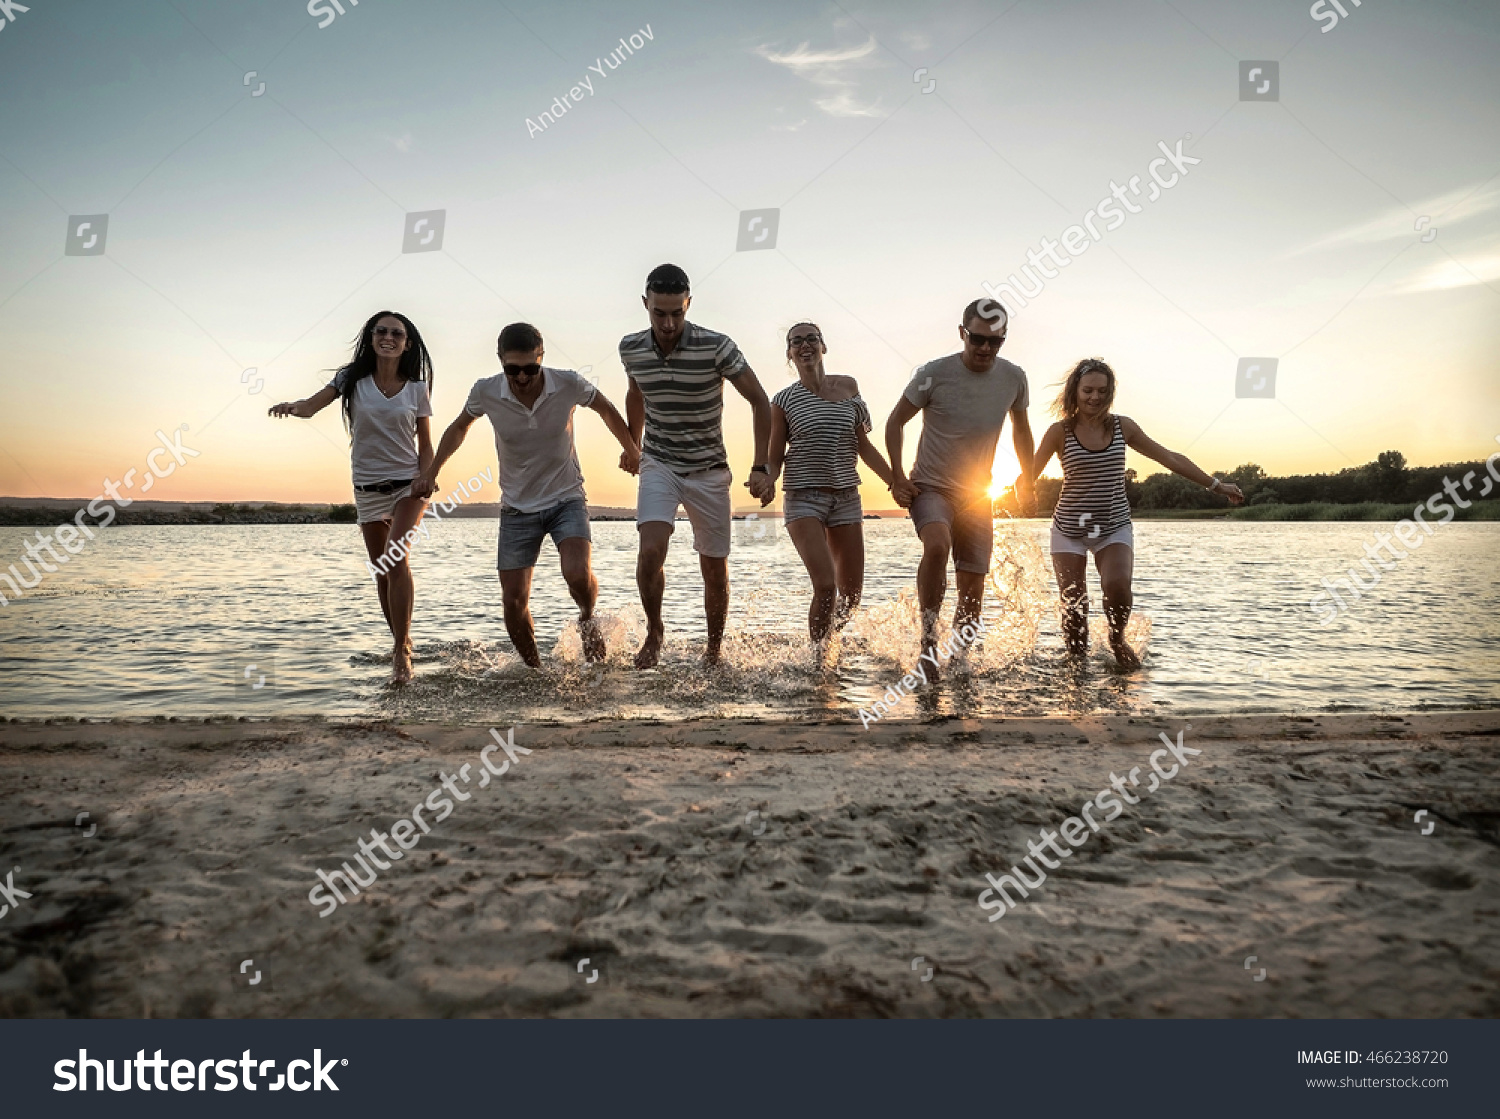 Silhouette of group young people on the beach. #466238720